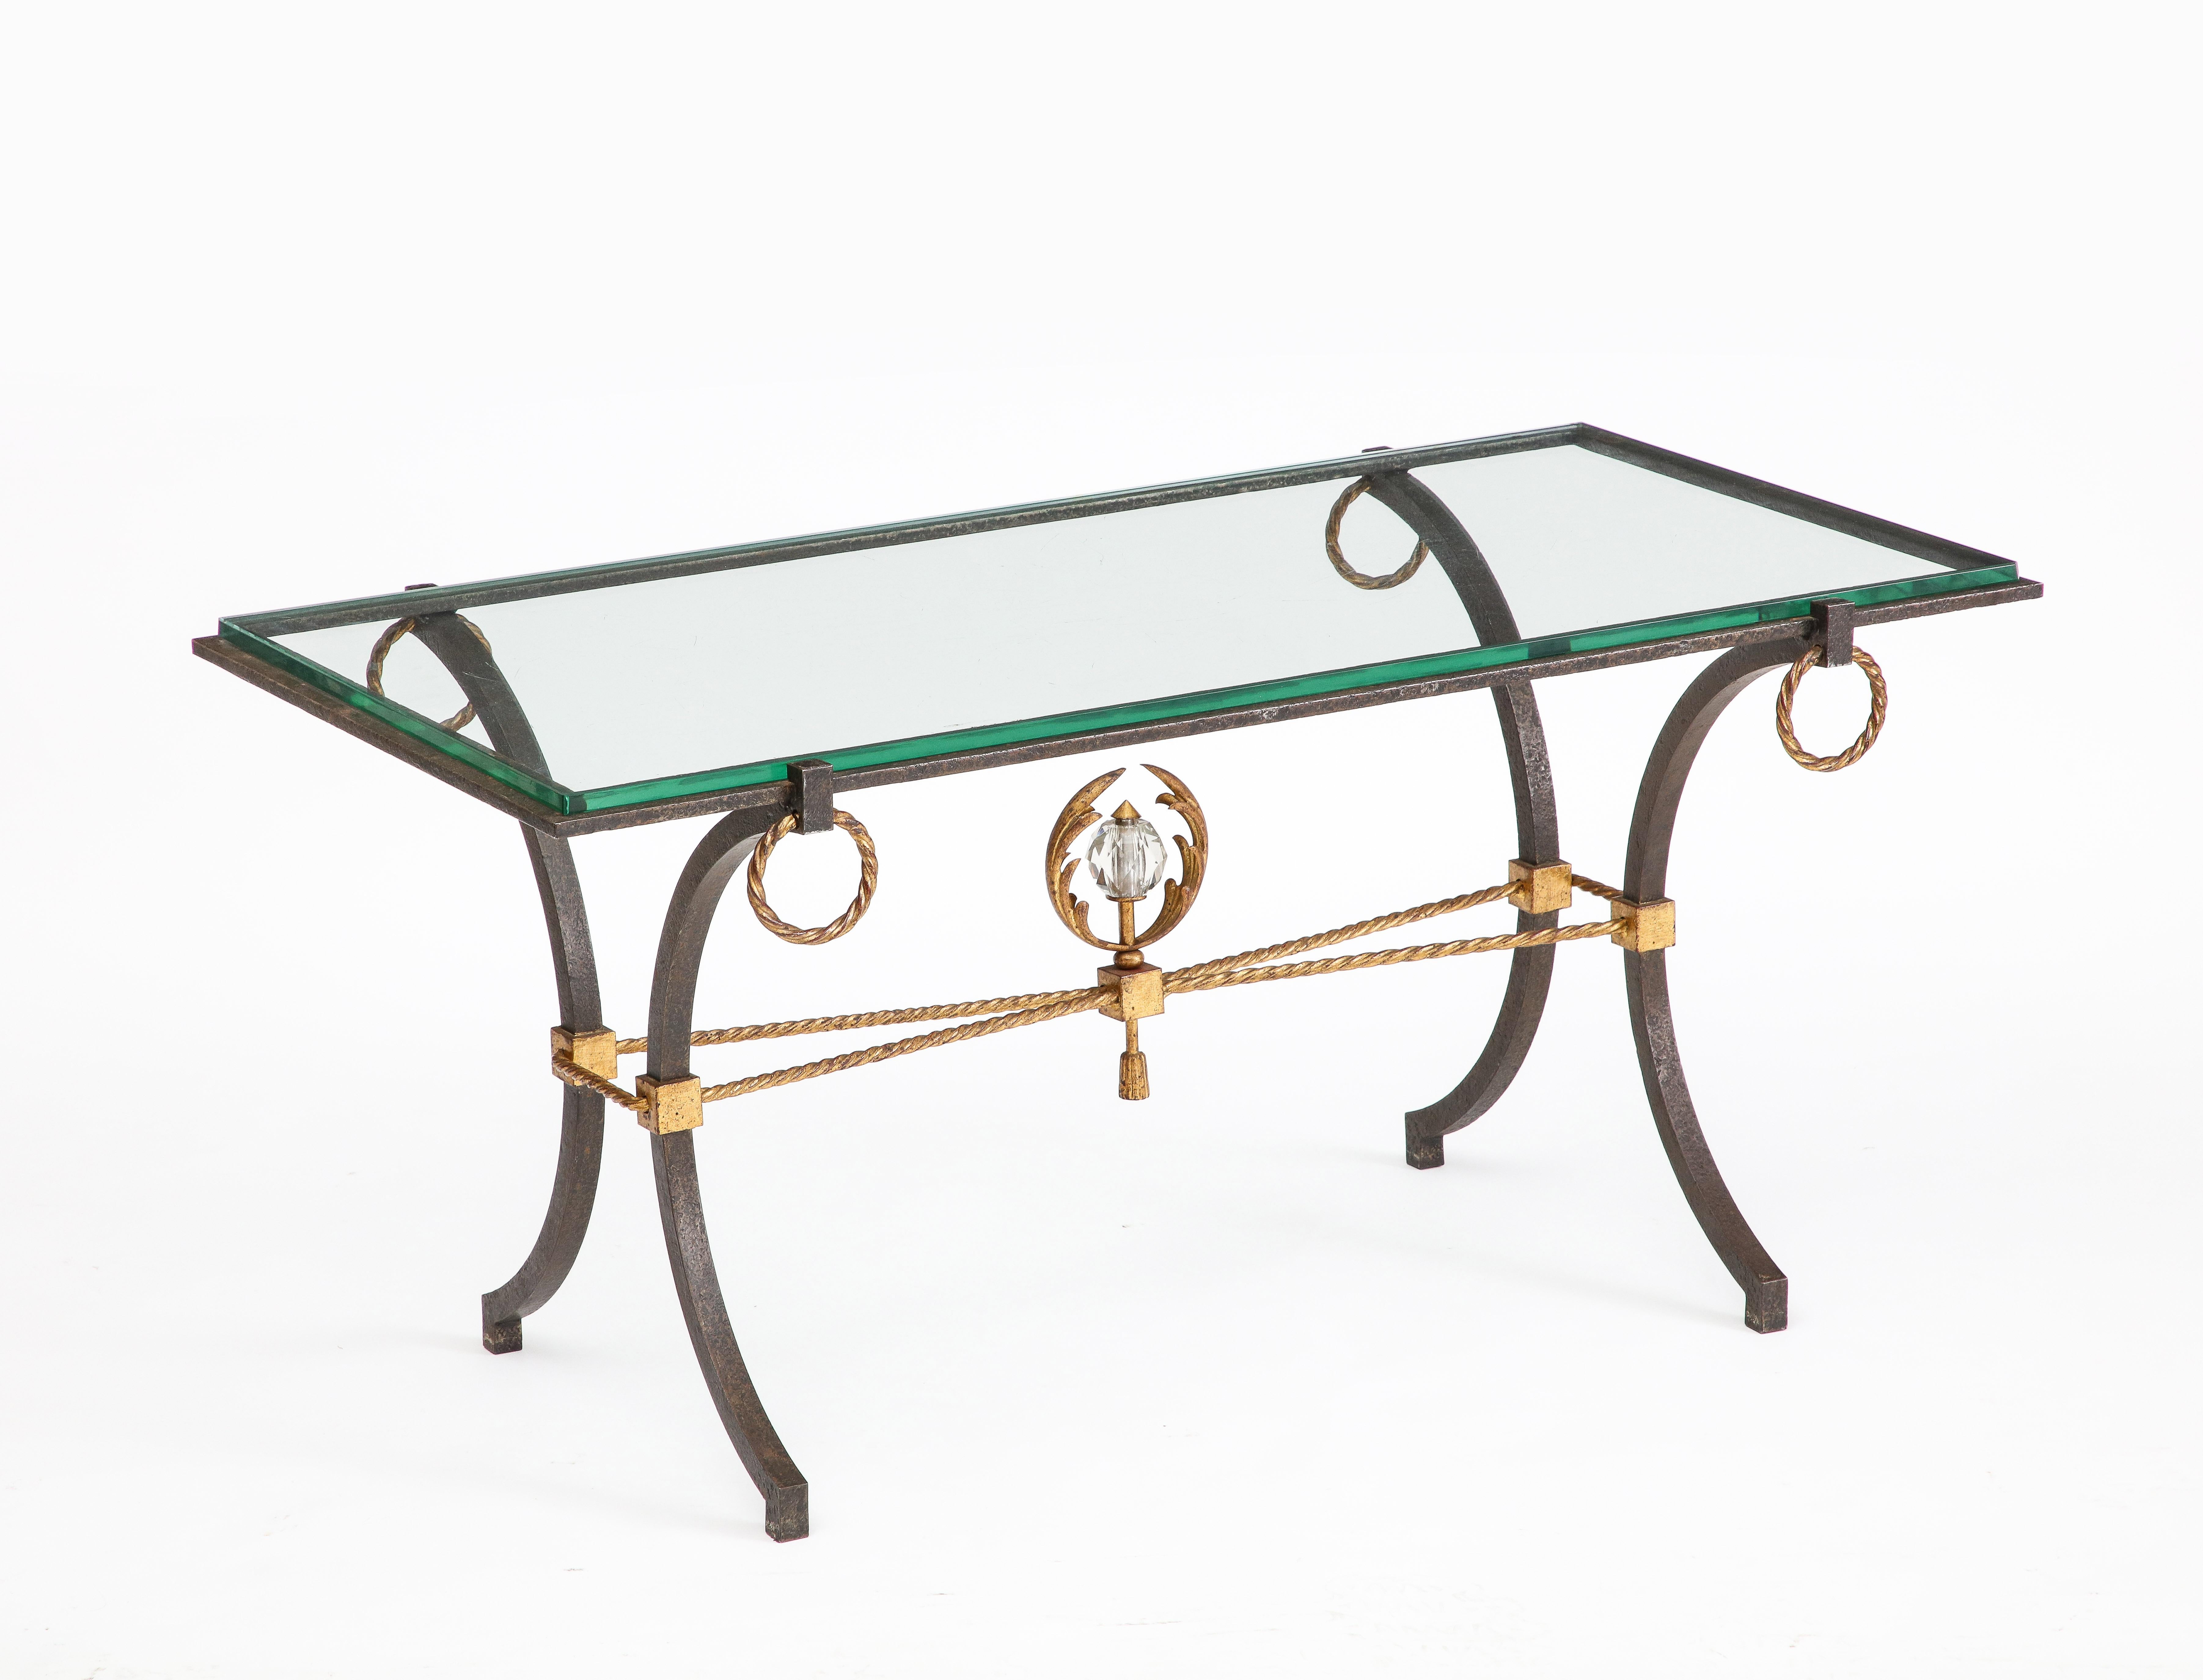 French iron and gilt coffee table, in the style of Poillerat, c. 1940. The curved iron legs support the glass top through which you can view an ornamental gilded centerpiece supported by gilded bronze rope stretchers. The gilded rope motif is also